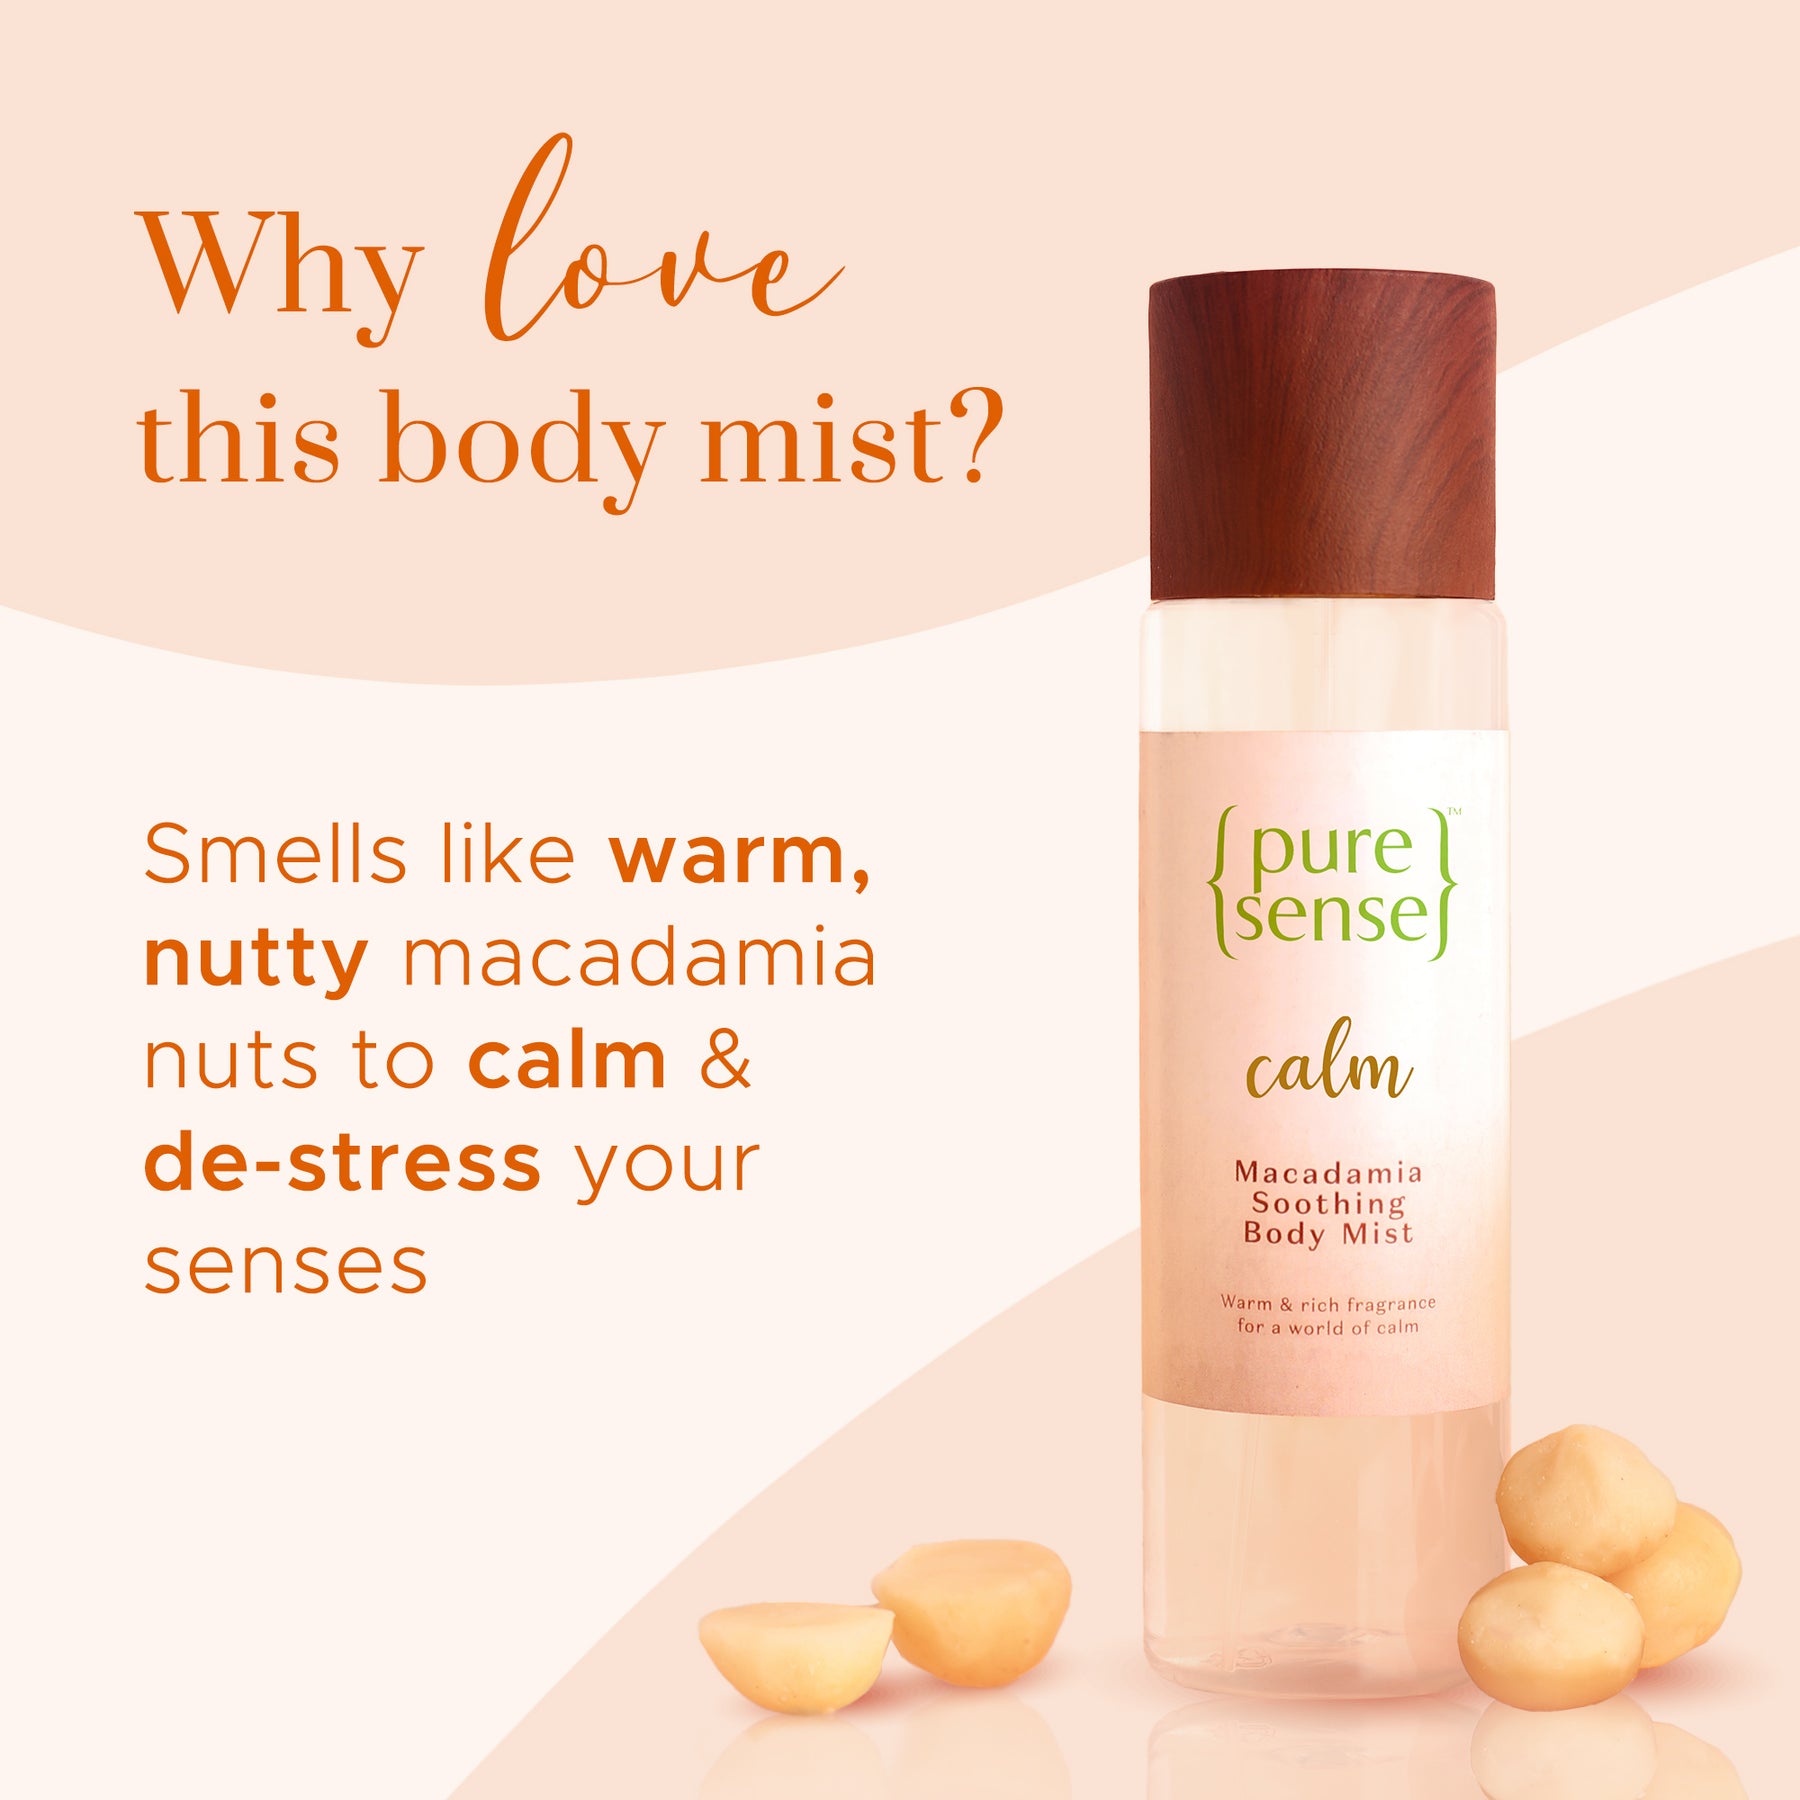 Calm Macadamia Soothing Body Mist (Pack of 2) | From the makers of Parachute Advansed | 150ml - PureSense